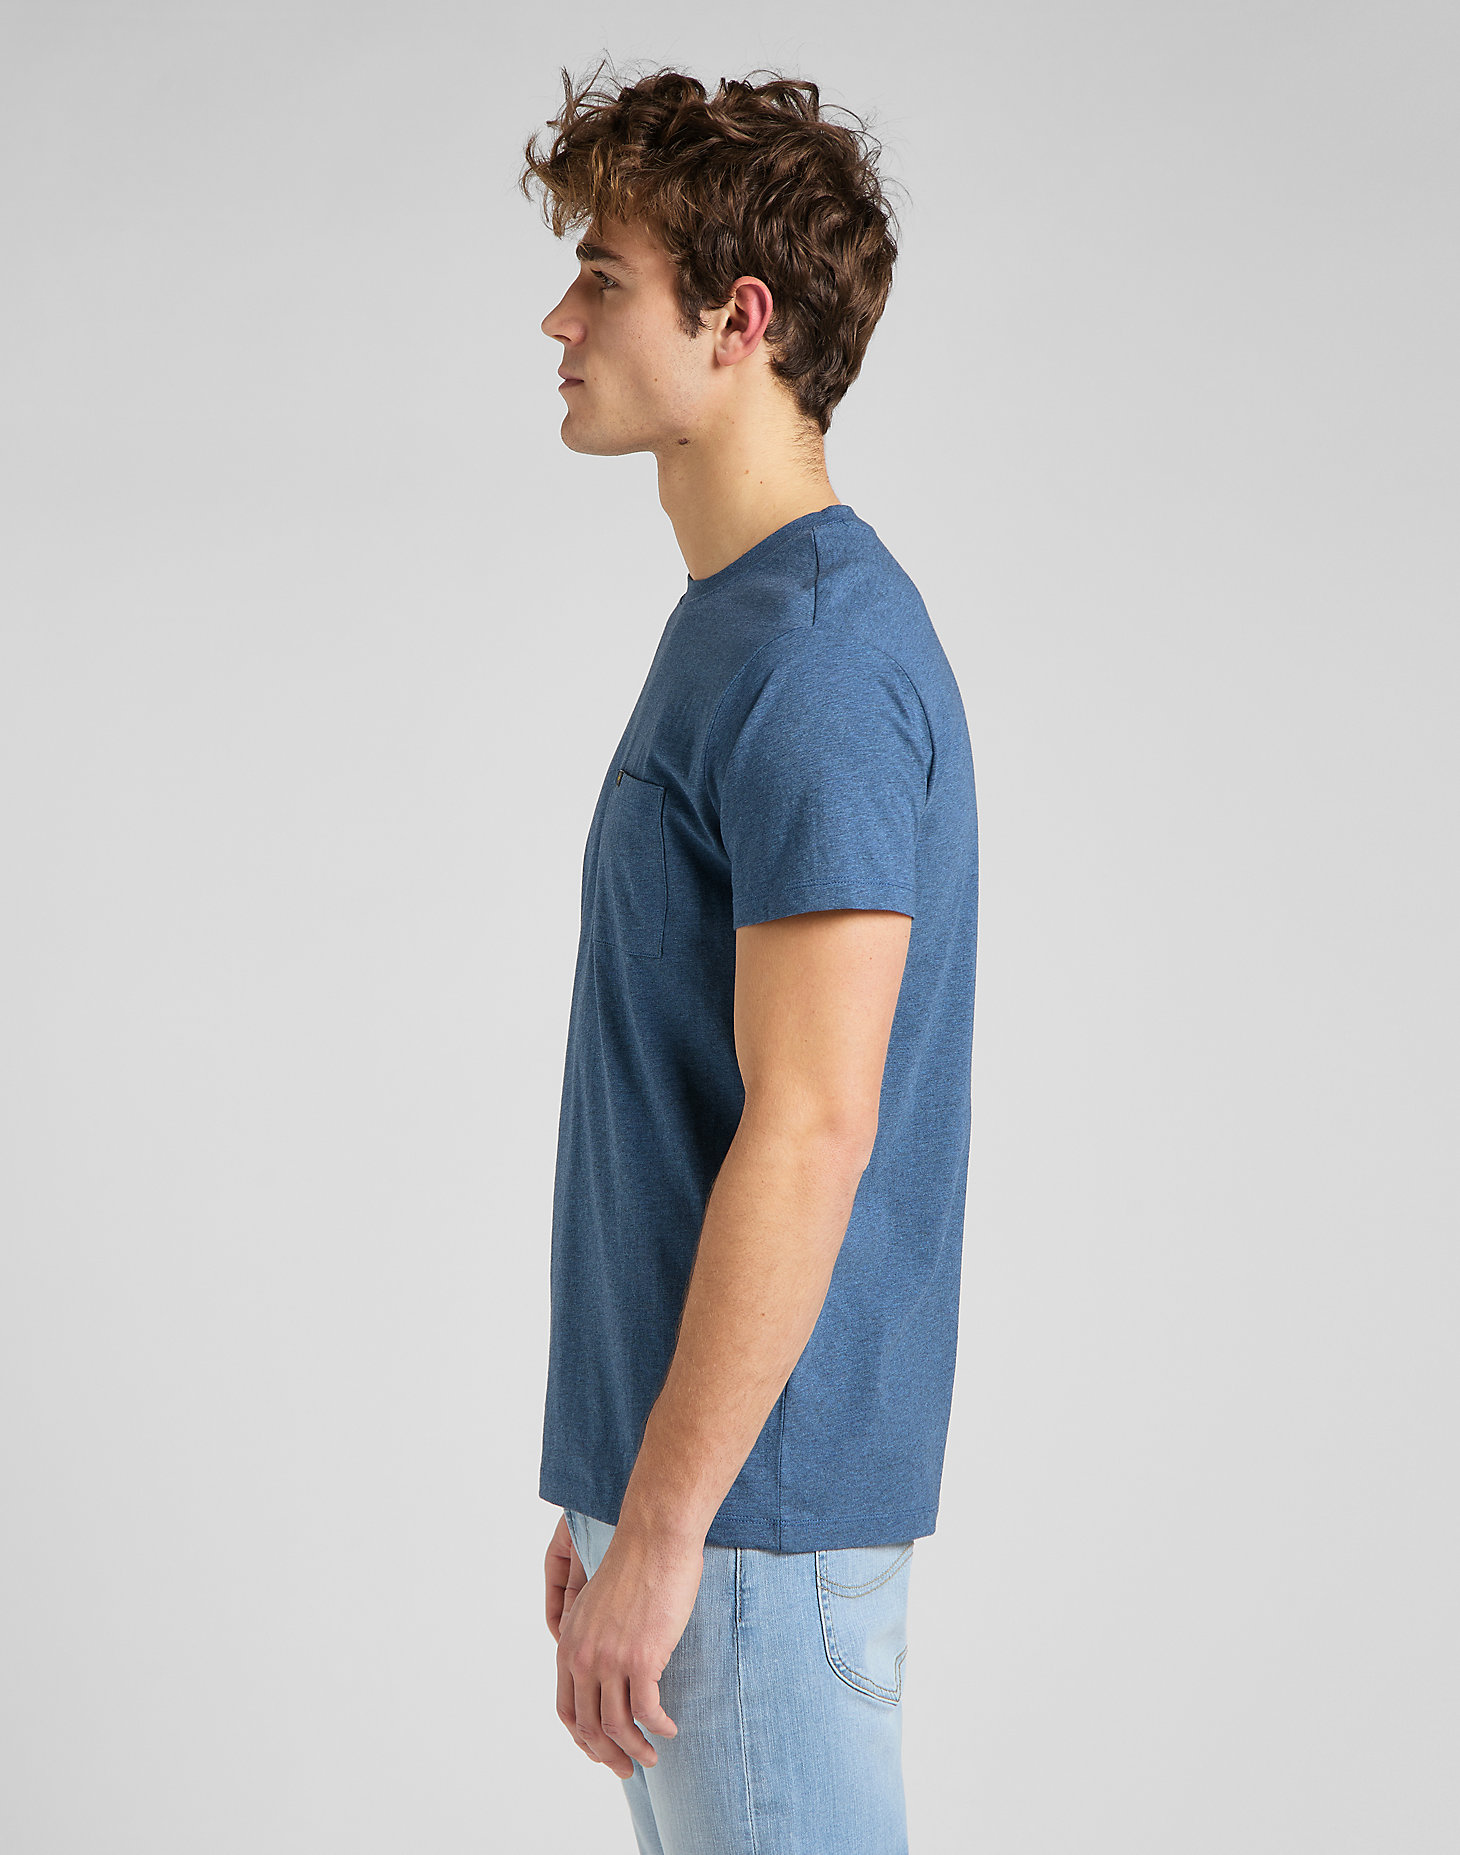 Ultimate Pocket Tee in Blue Union alternative view 3